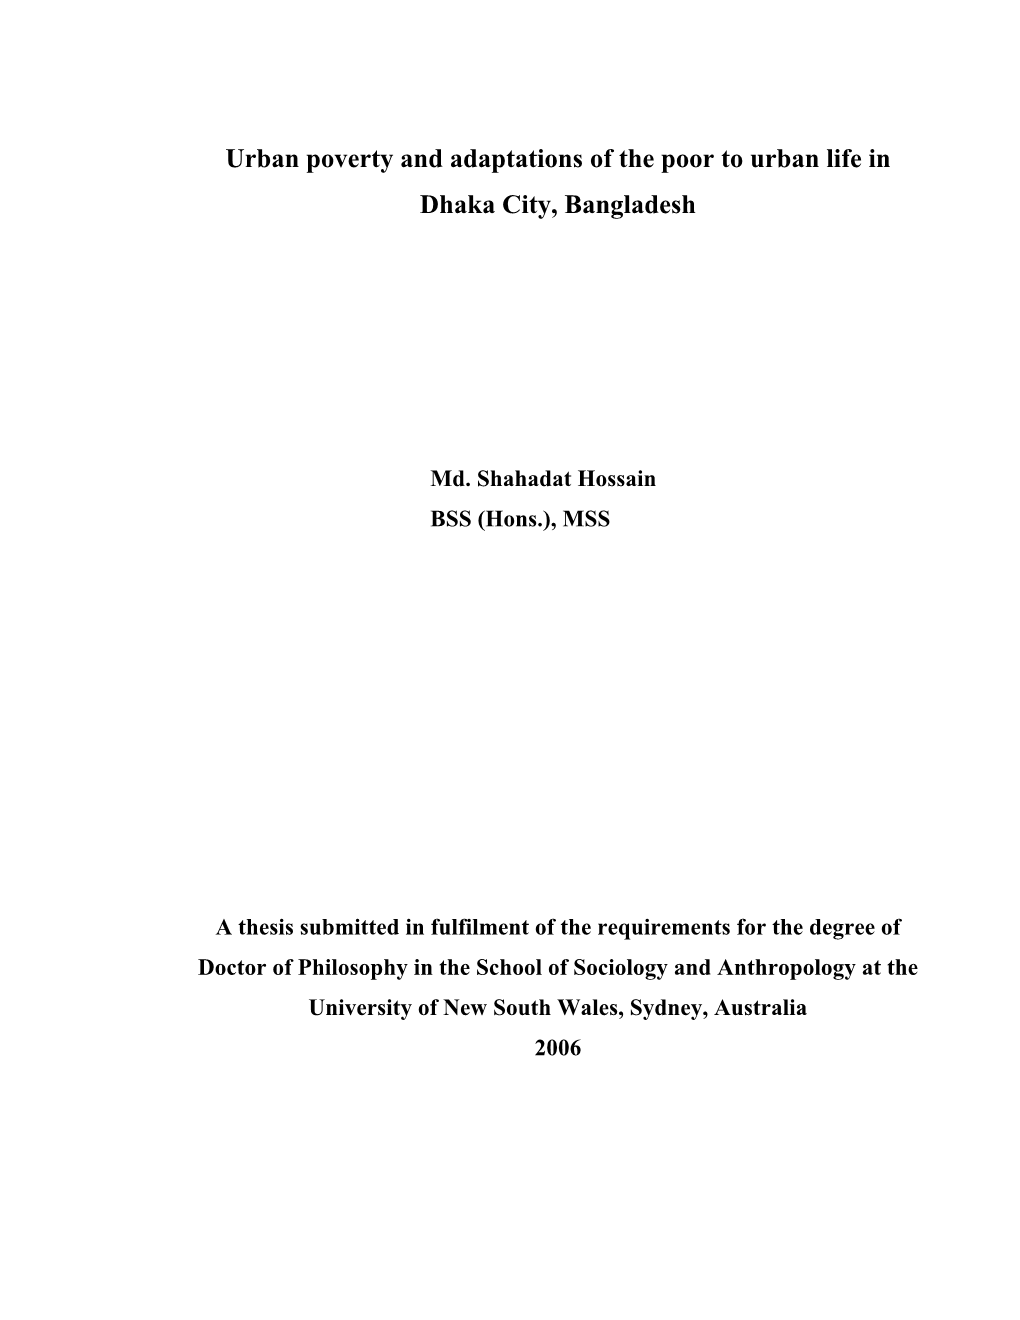 Urban Poverty and Adaptations of the Poor to Urban Life in Dhaka City, Bangladesh